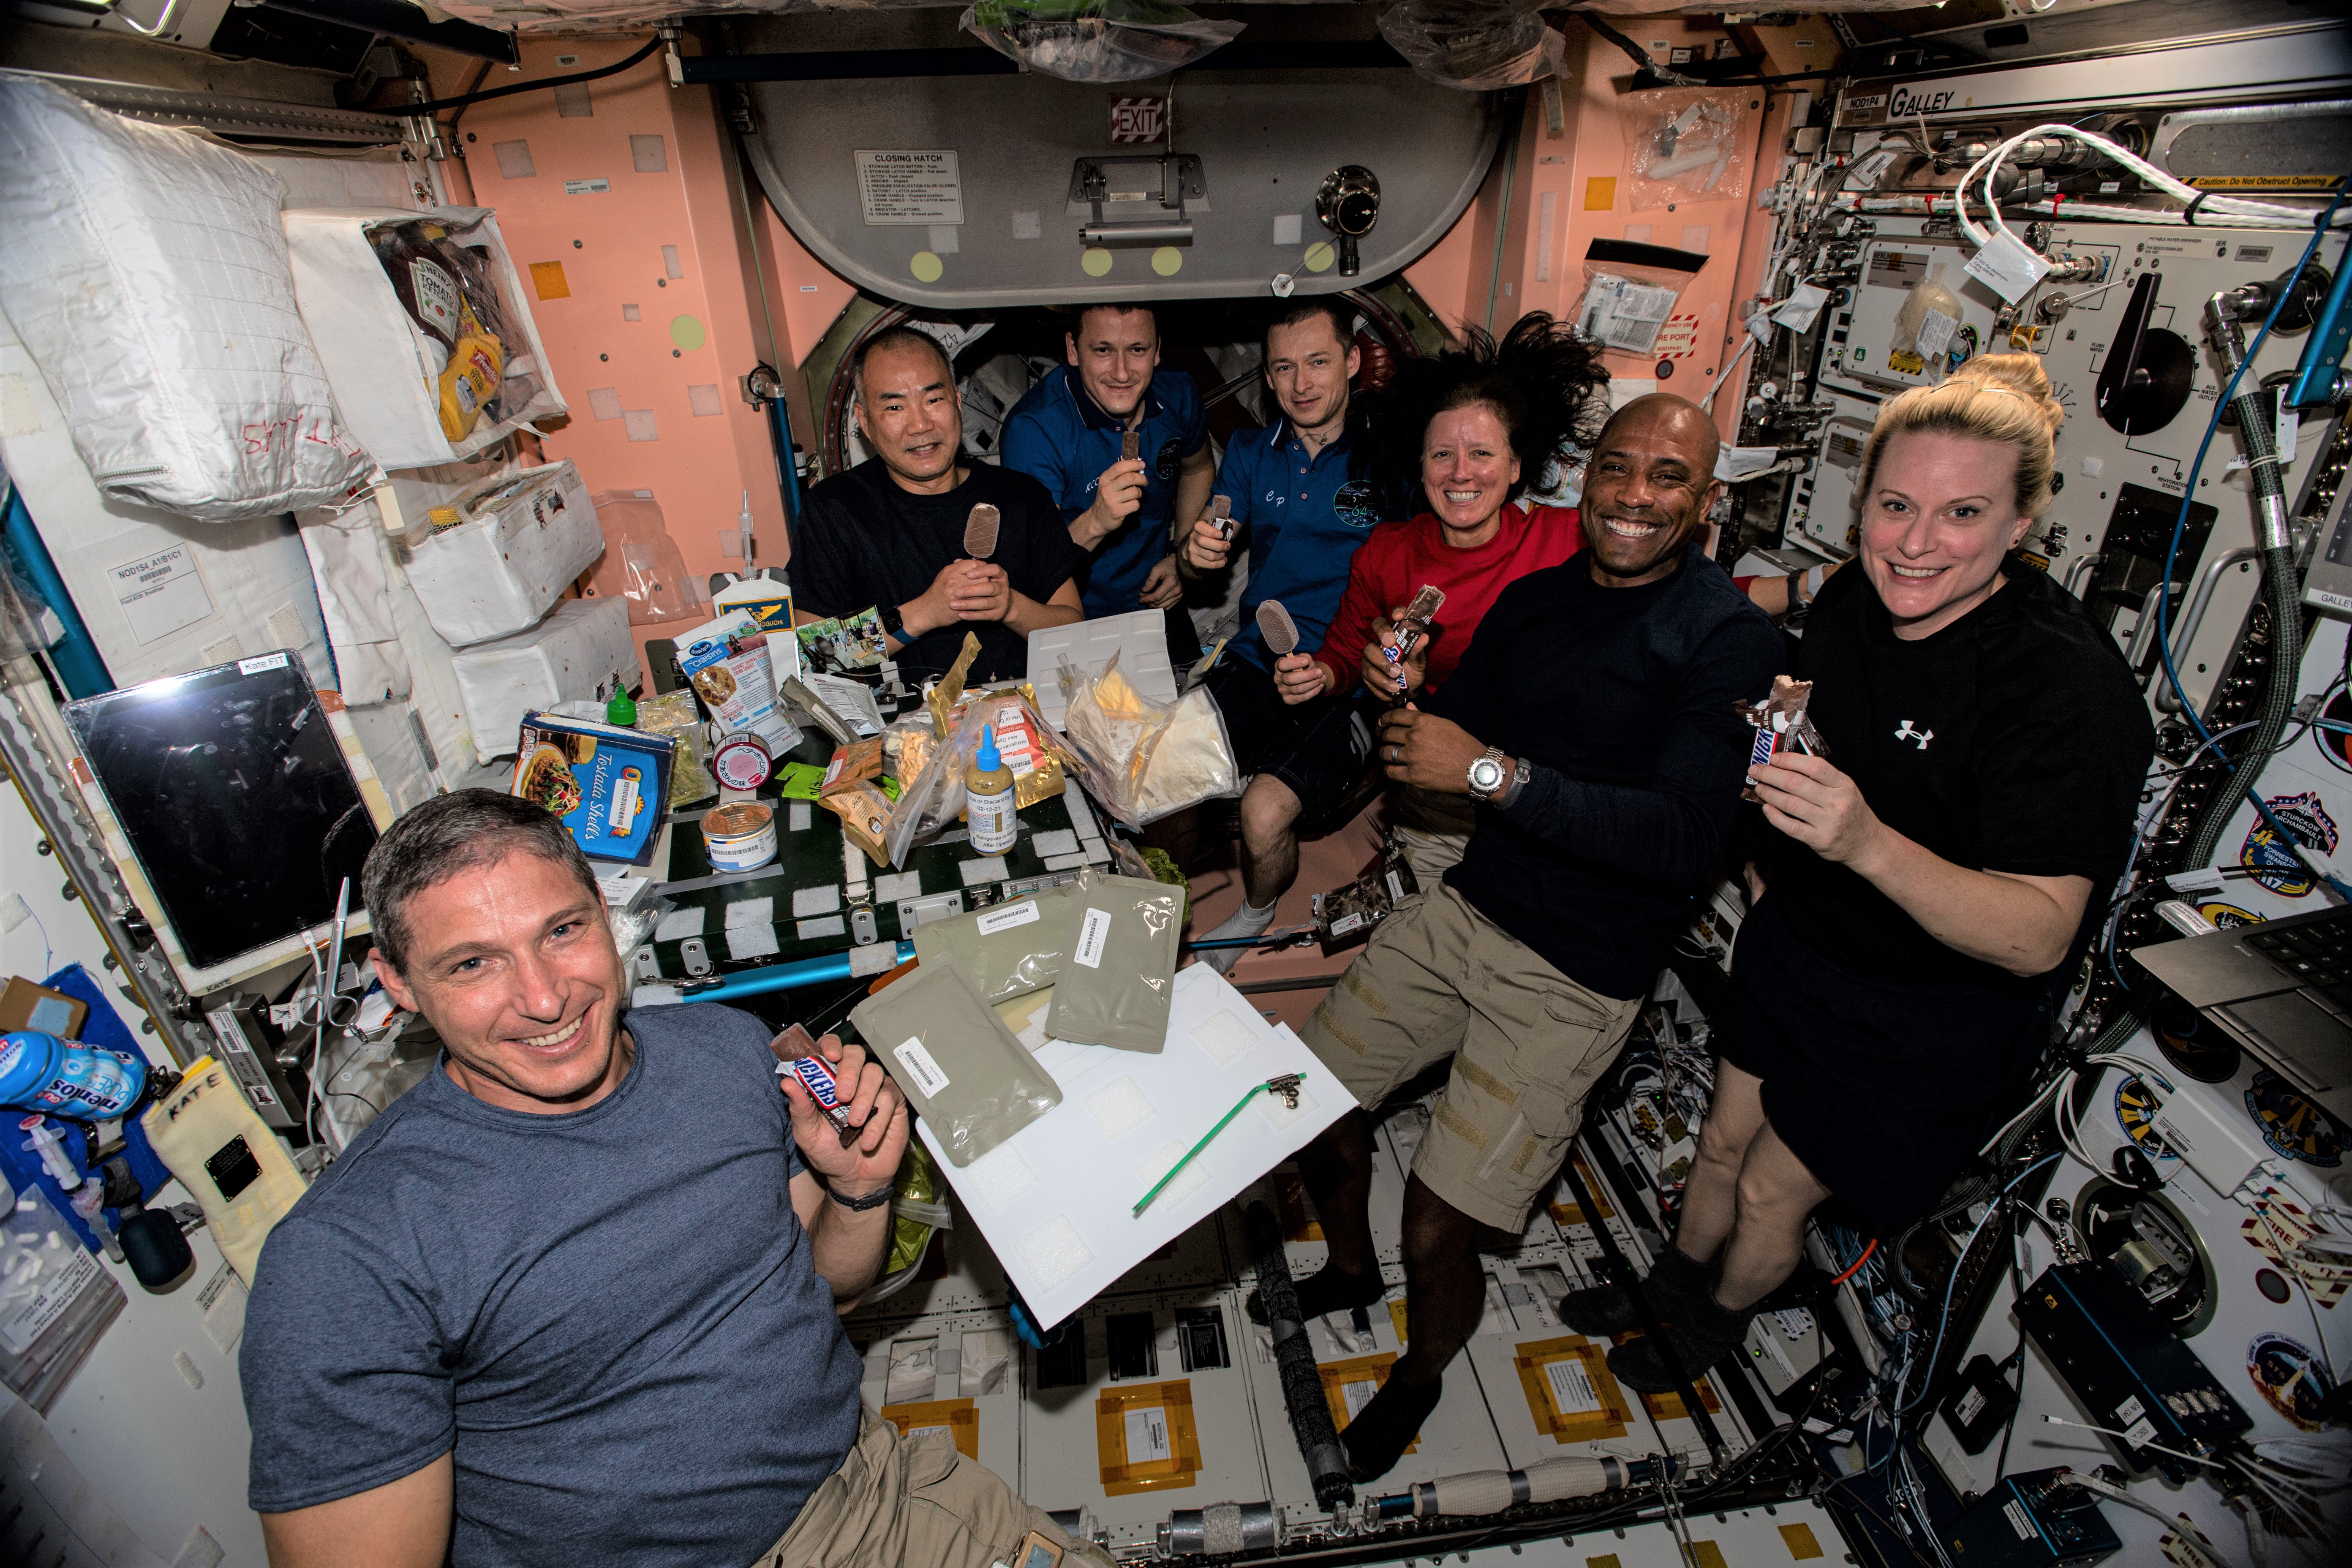 The Expedition 64 crew of NASA astronaut Michael S. Hopkins, Soichi Noguchi of the Japan Aerospace Exploration Agency, Sergei V. Kud-Sverchkov and Sergei N. Ryzhikov of Roscosmos, and NASA astronauts K. Meghan McArthur, Victor J. Glover, and Rubins enjoying the Thanksgiving meal including frozen treats for dessert